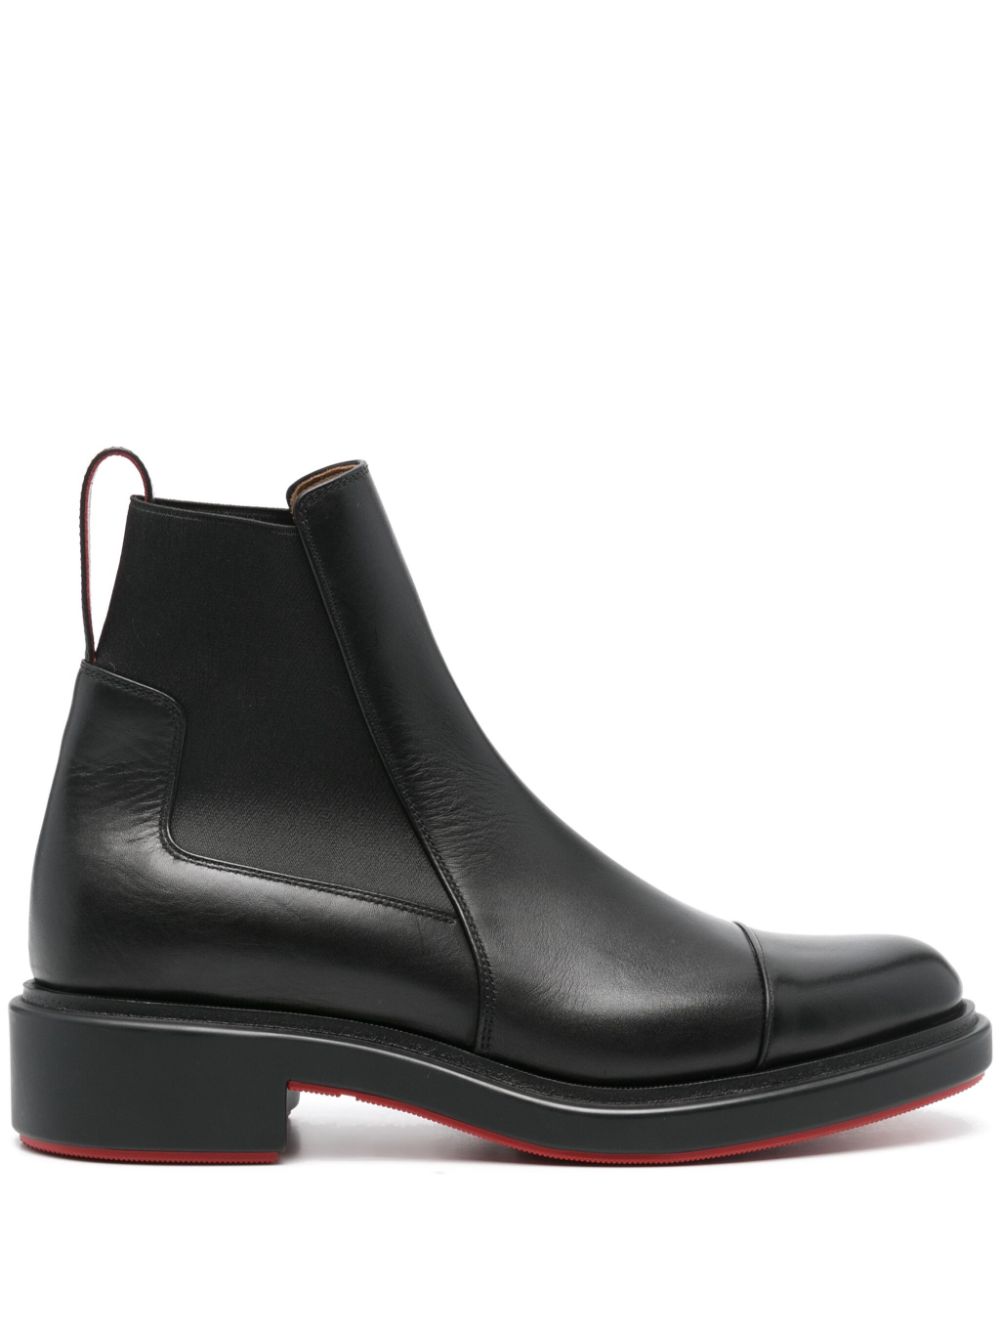 Image 1 of Christian Louboutin leather ankle boots